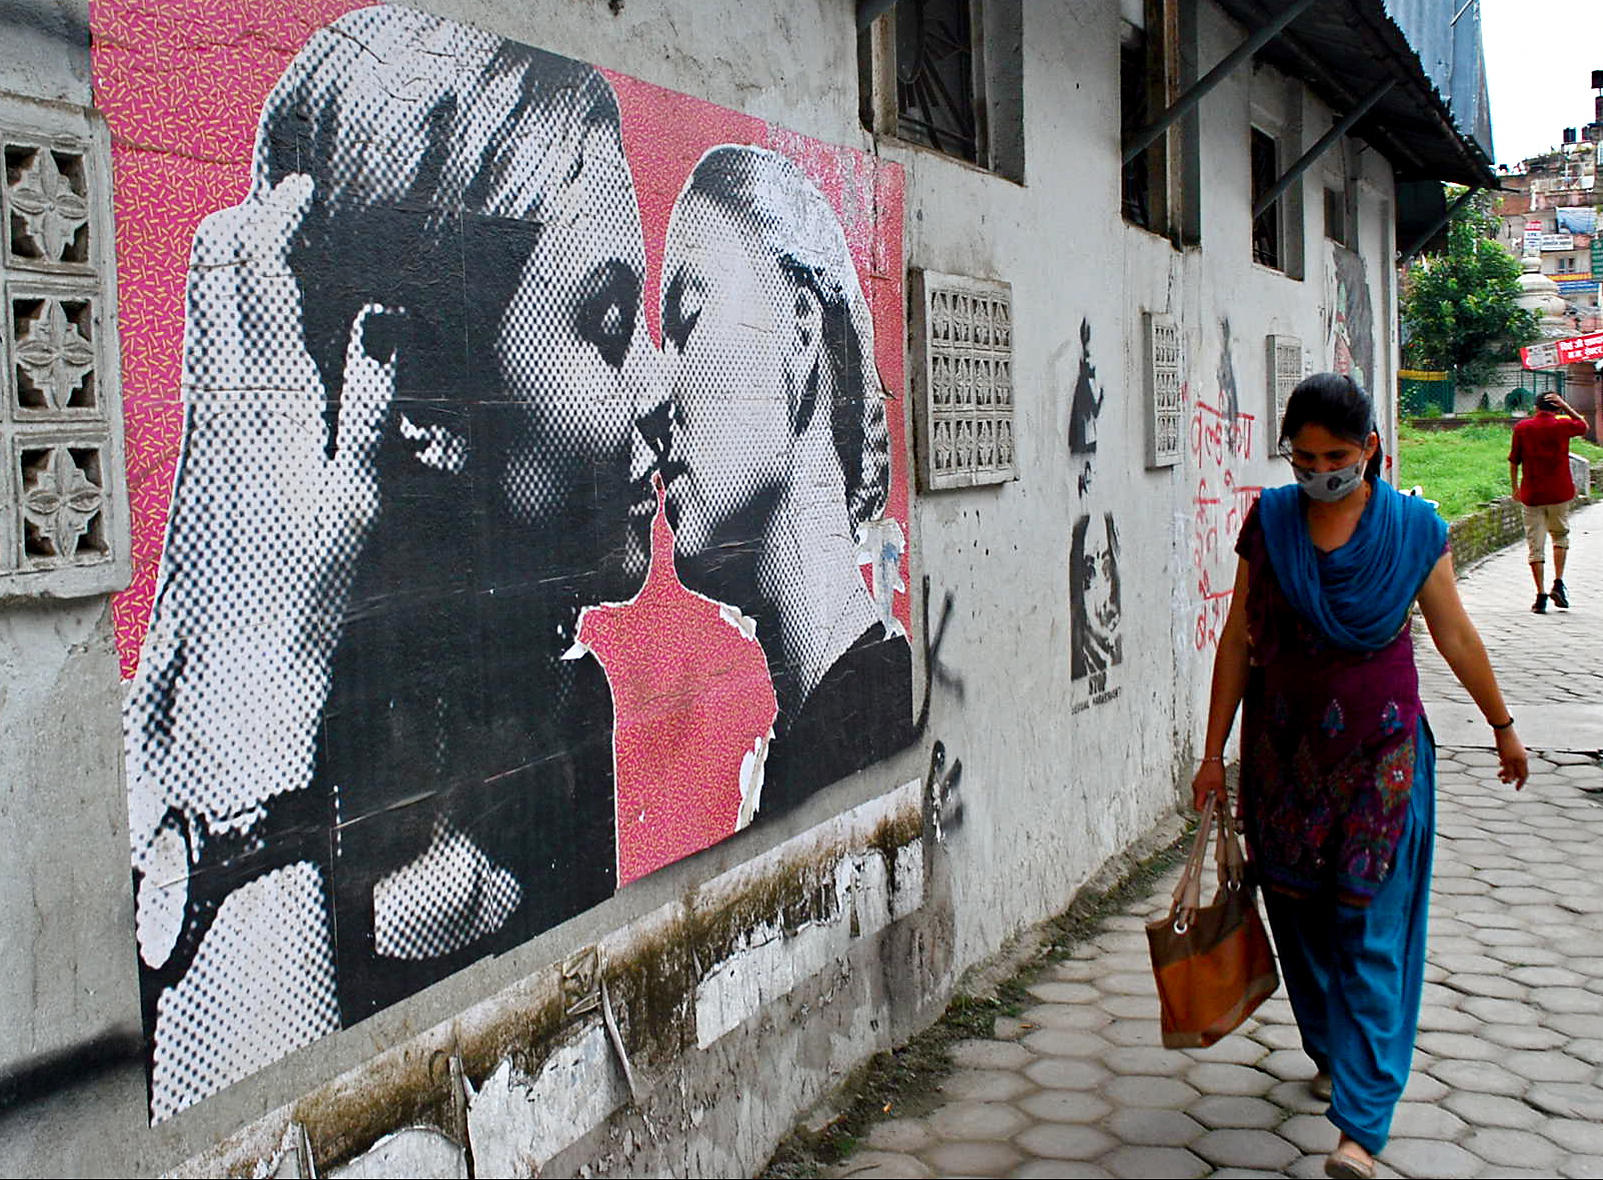 A mural in Kathmandu's Ratna Park area marks an "Understand Love, Love Is Never Wrong" campaign. Photo: SMP